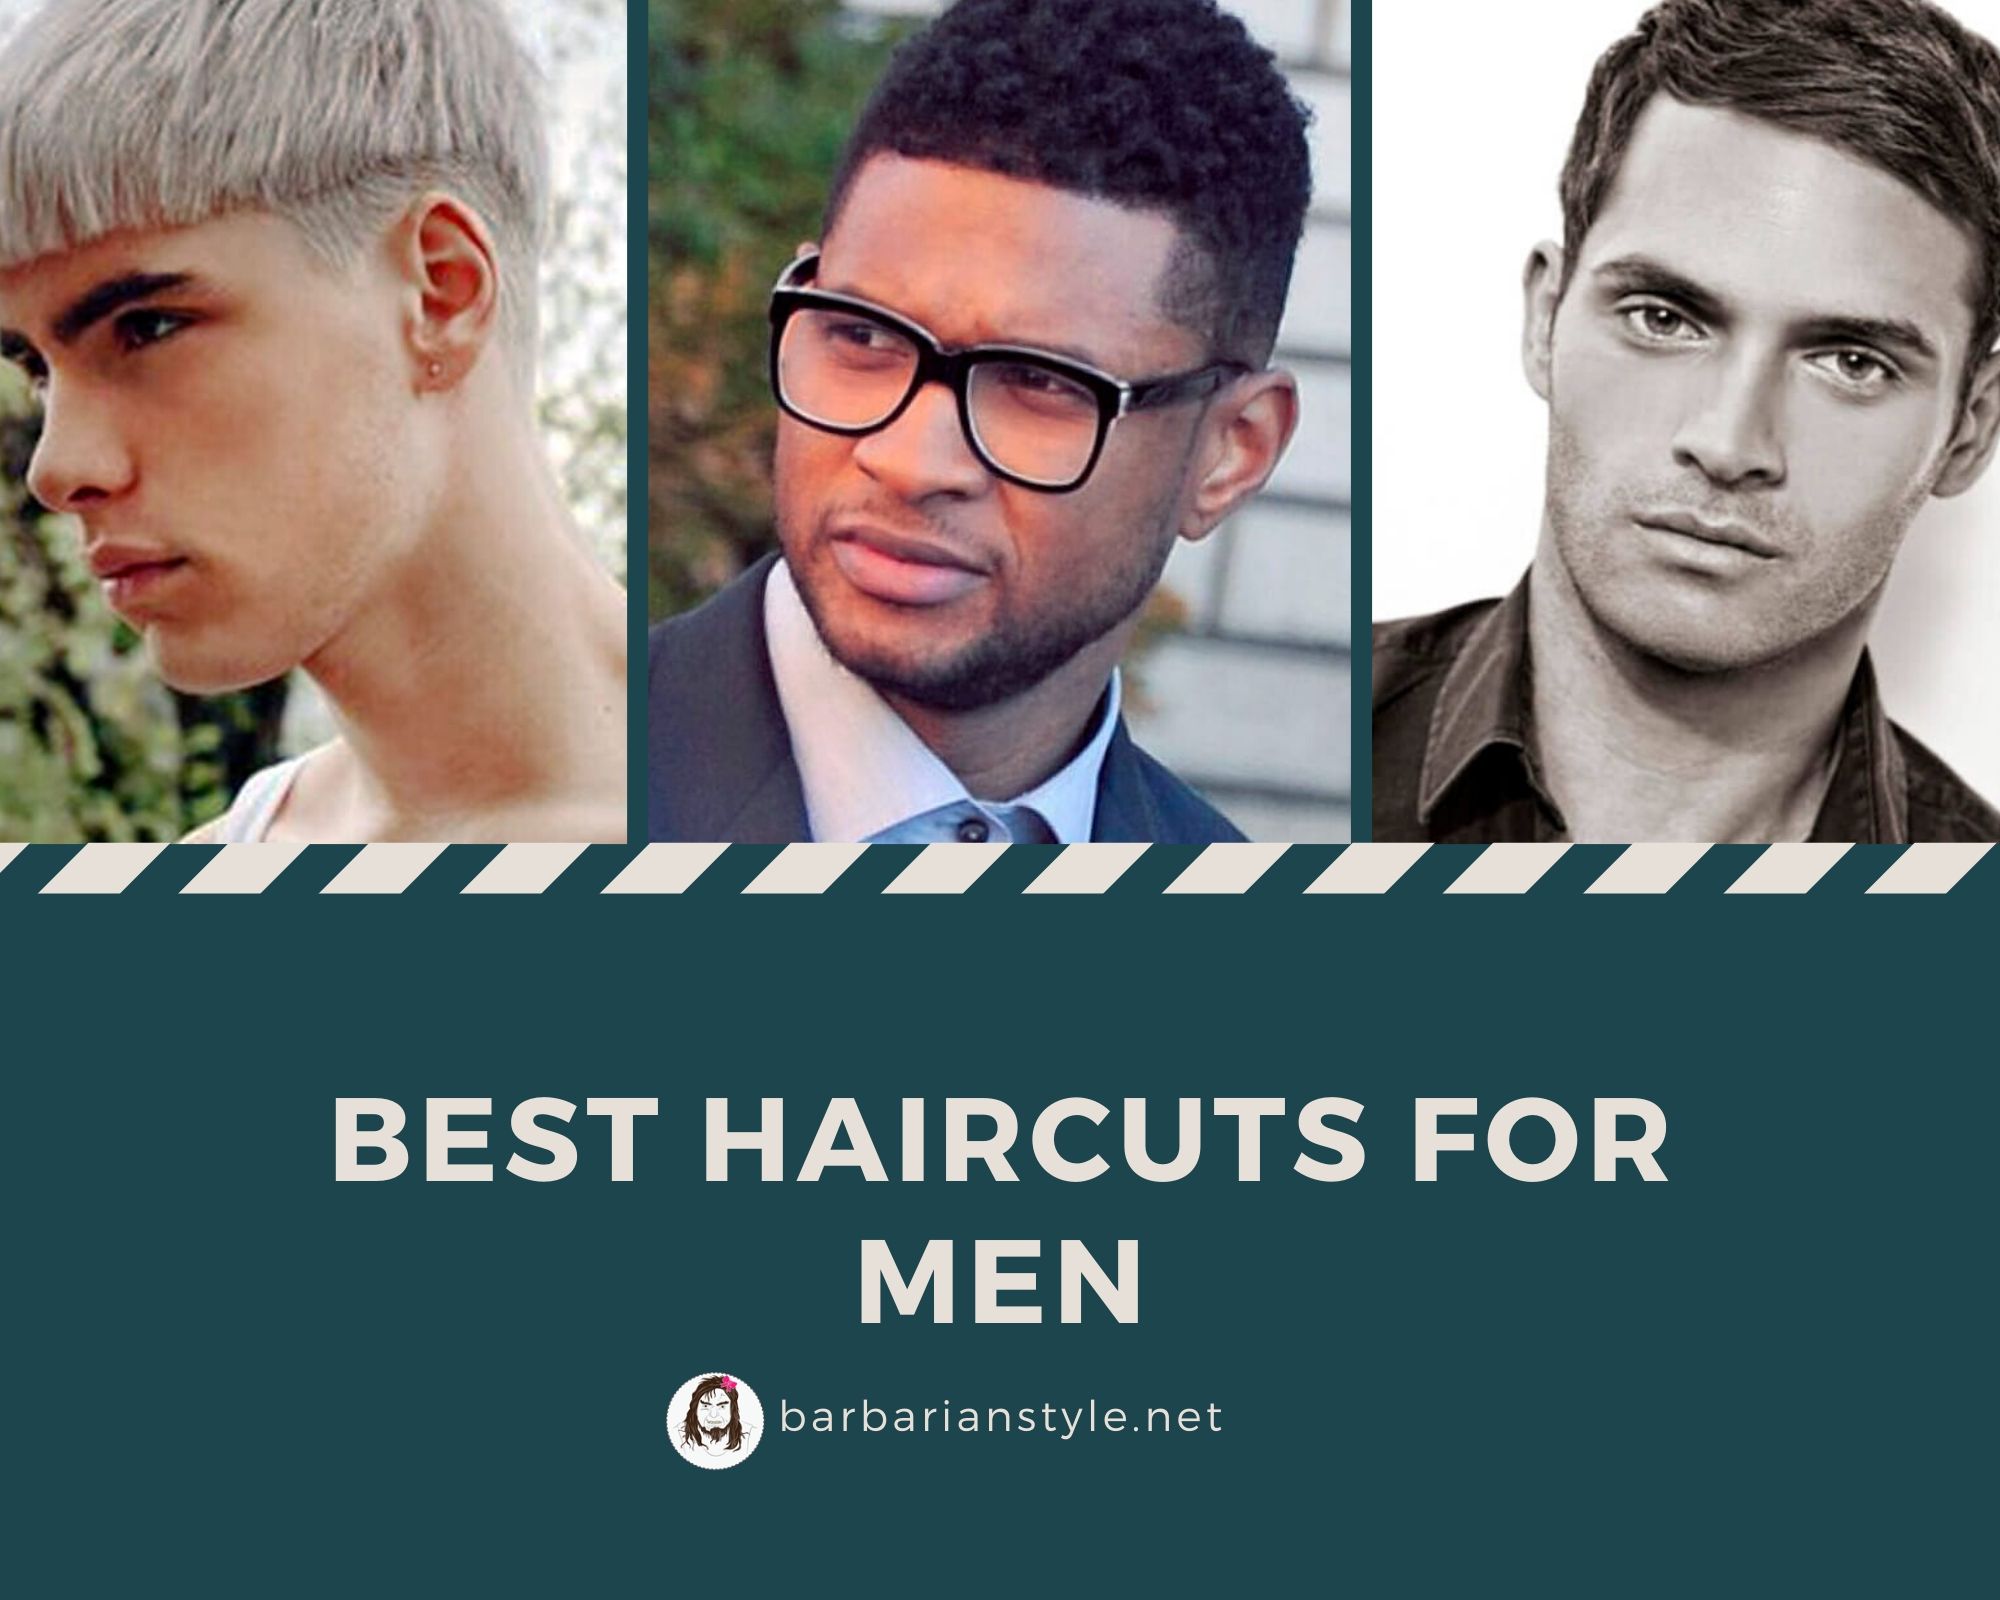 Best Haircuts for Men. To Look Like a Handsome Model.